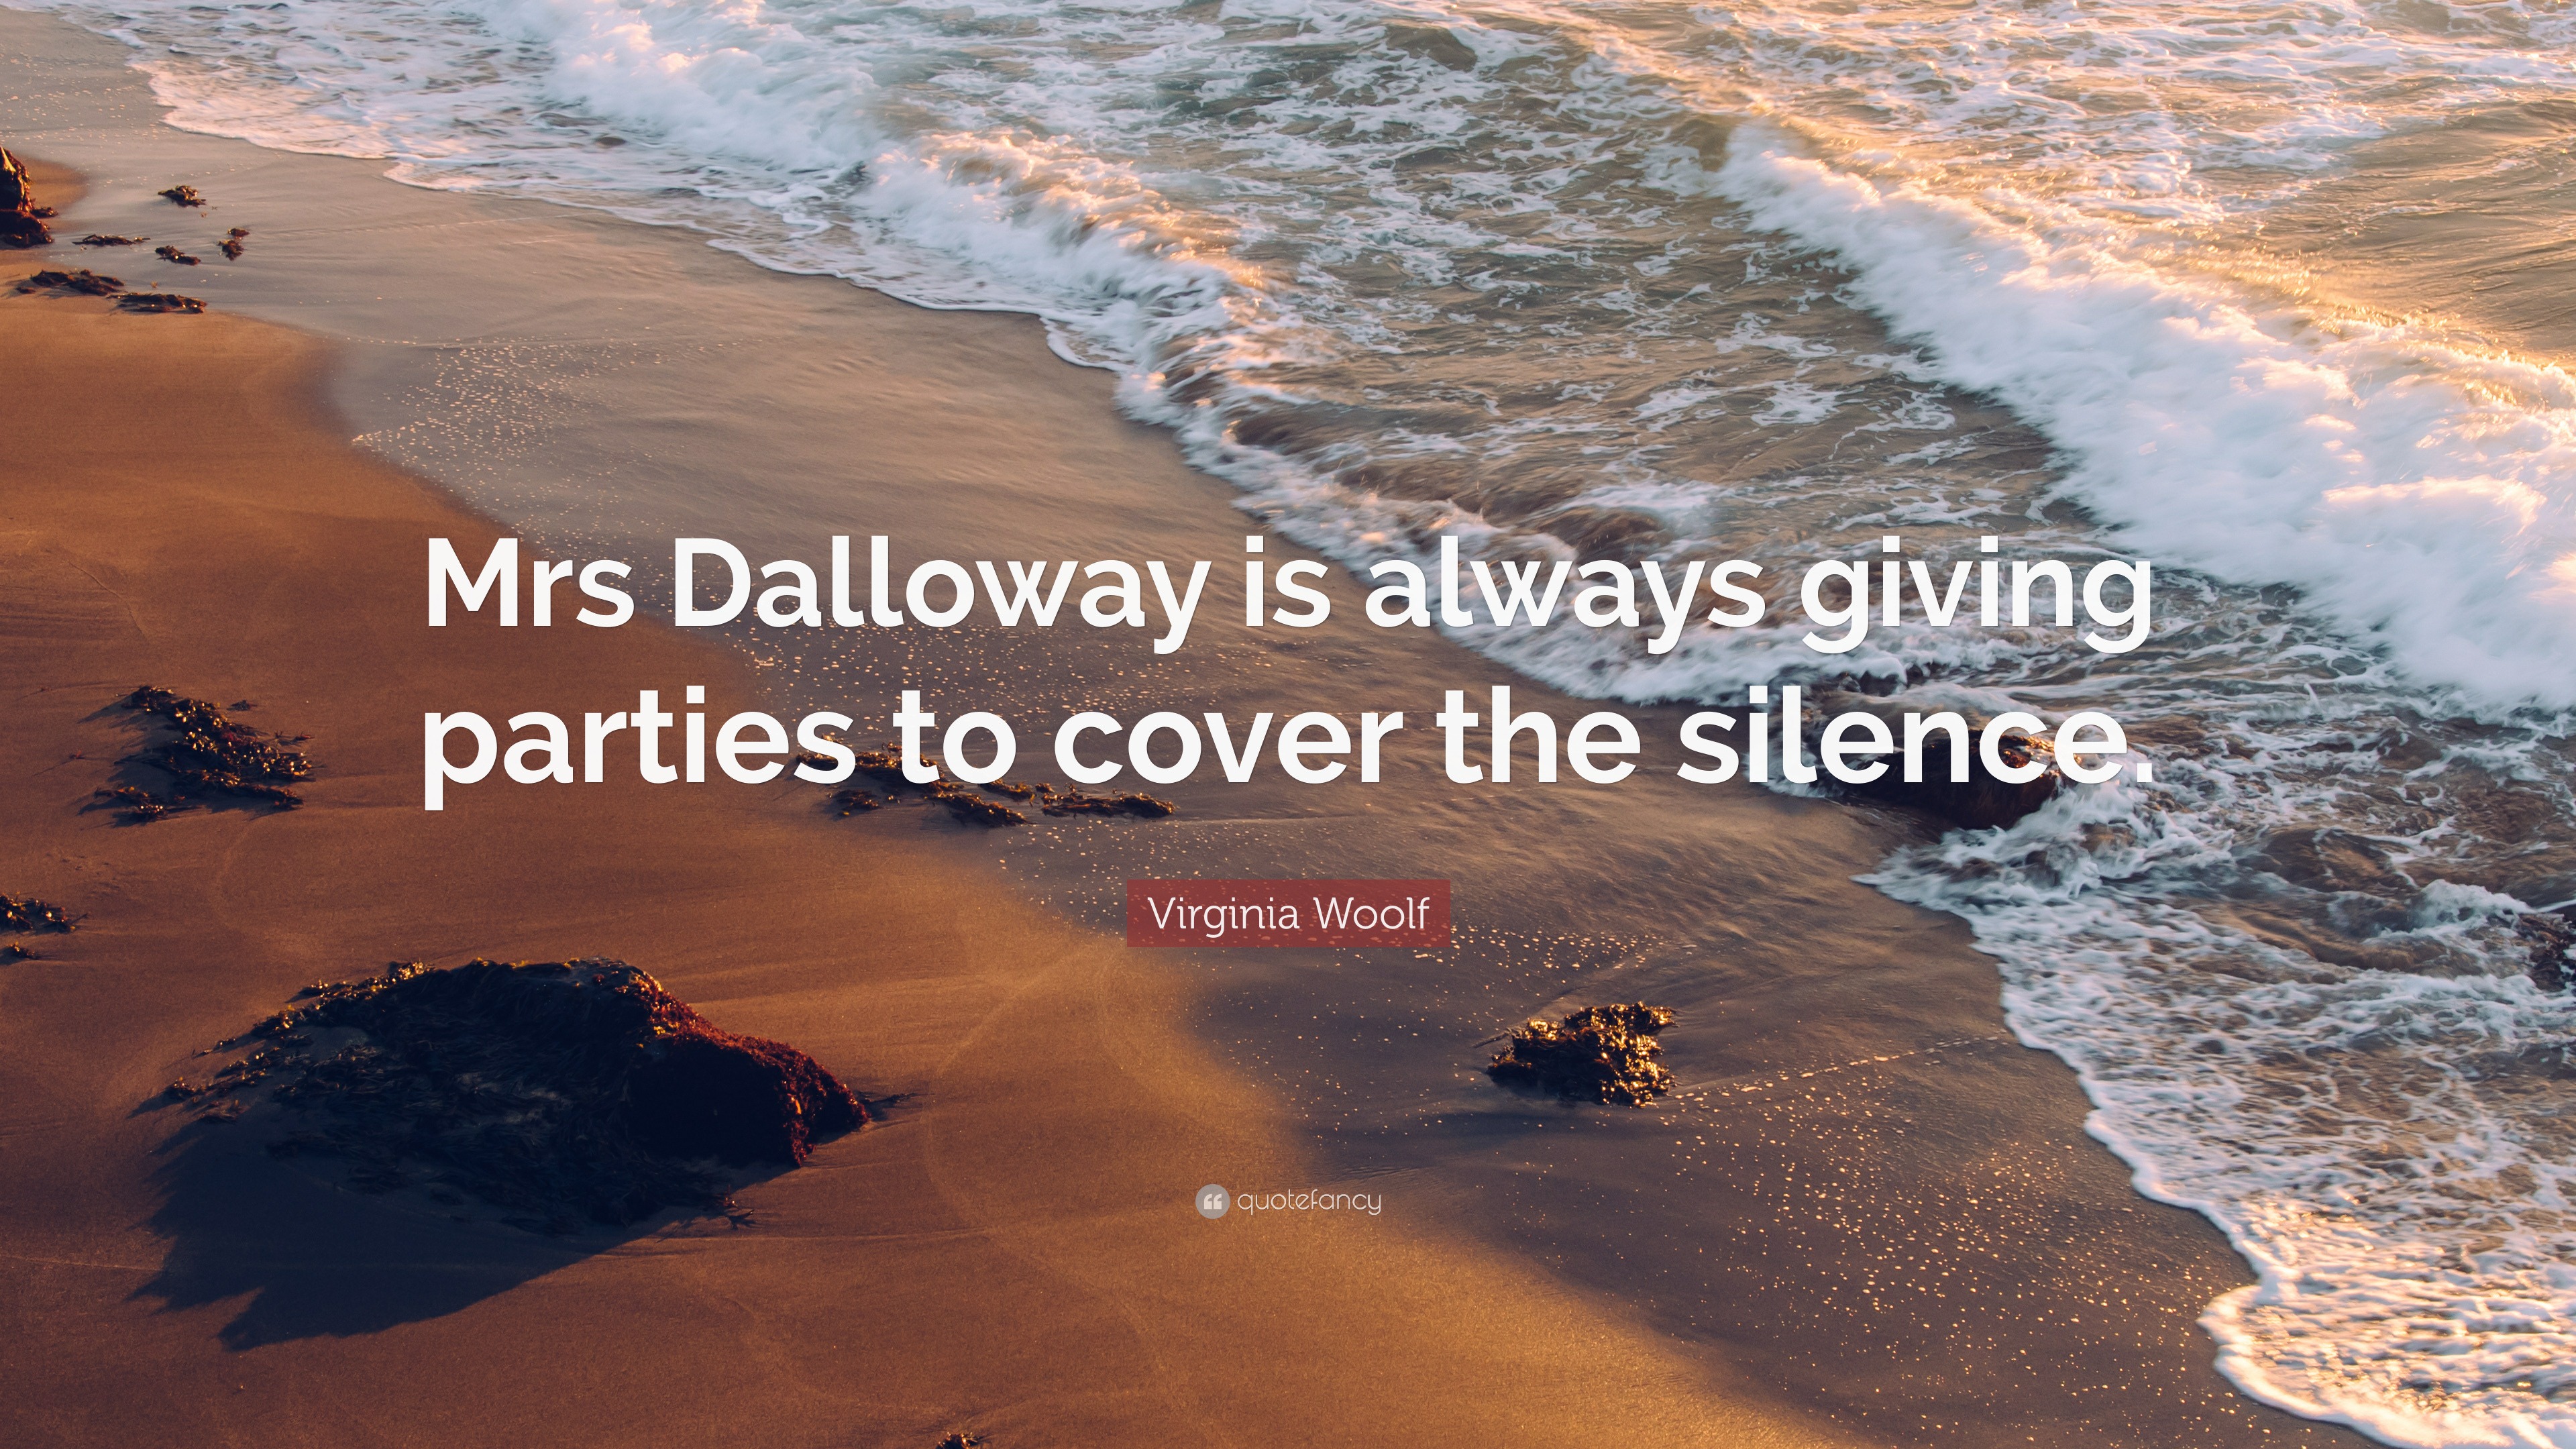 Virginia Woolf Quote: “Mrs Dalloway is always giving parties to cover